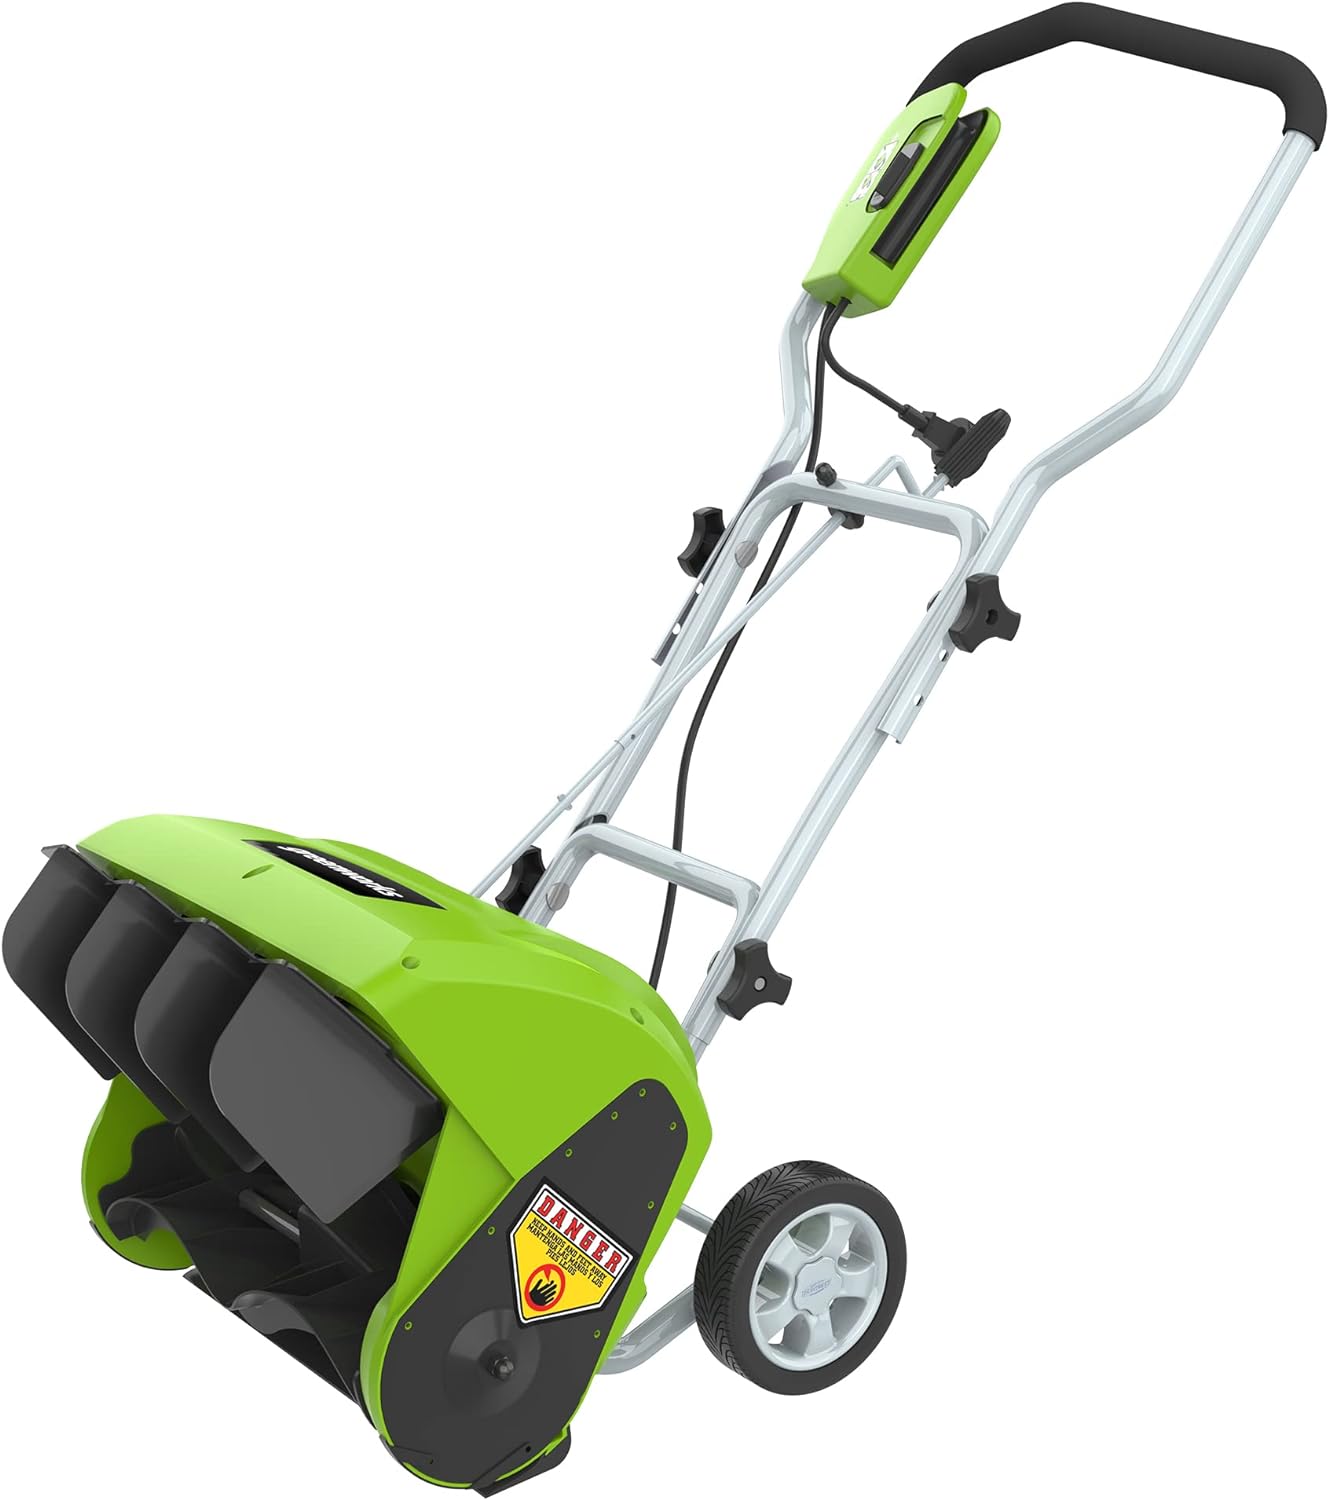 Greenworks Open Box Greenworks 10 Amp 16-Inch Corded Electric Snow Blower 26022 - Green